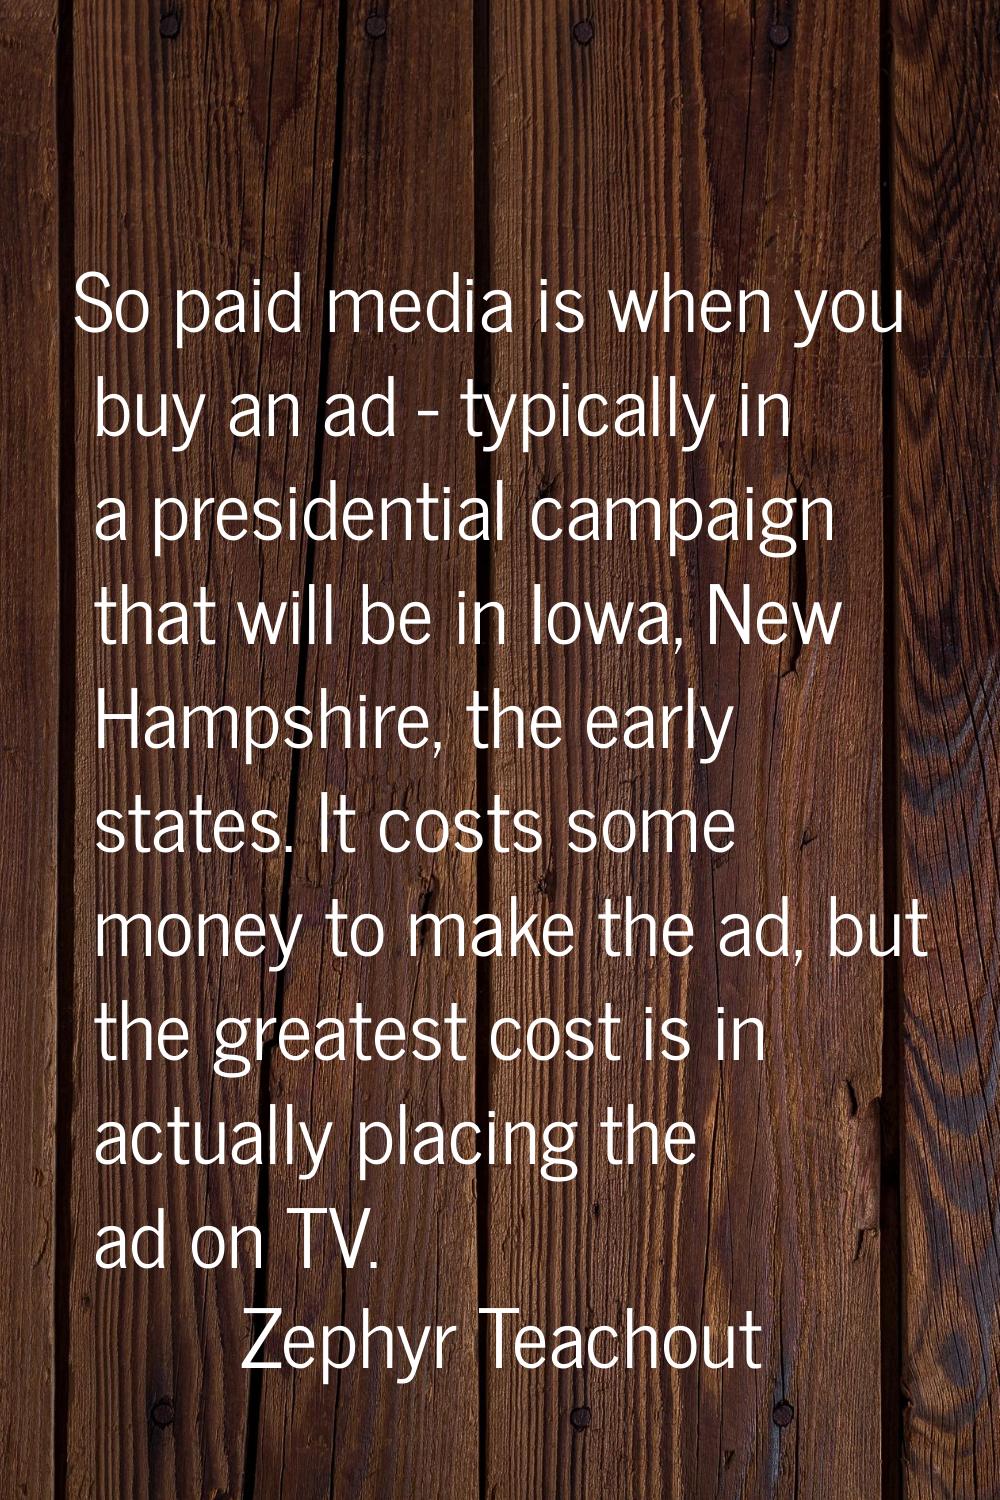 So paid media is when you buy an ad - typically in a presidential campaign that will be in Iowa, Ne